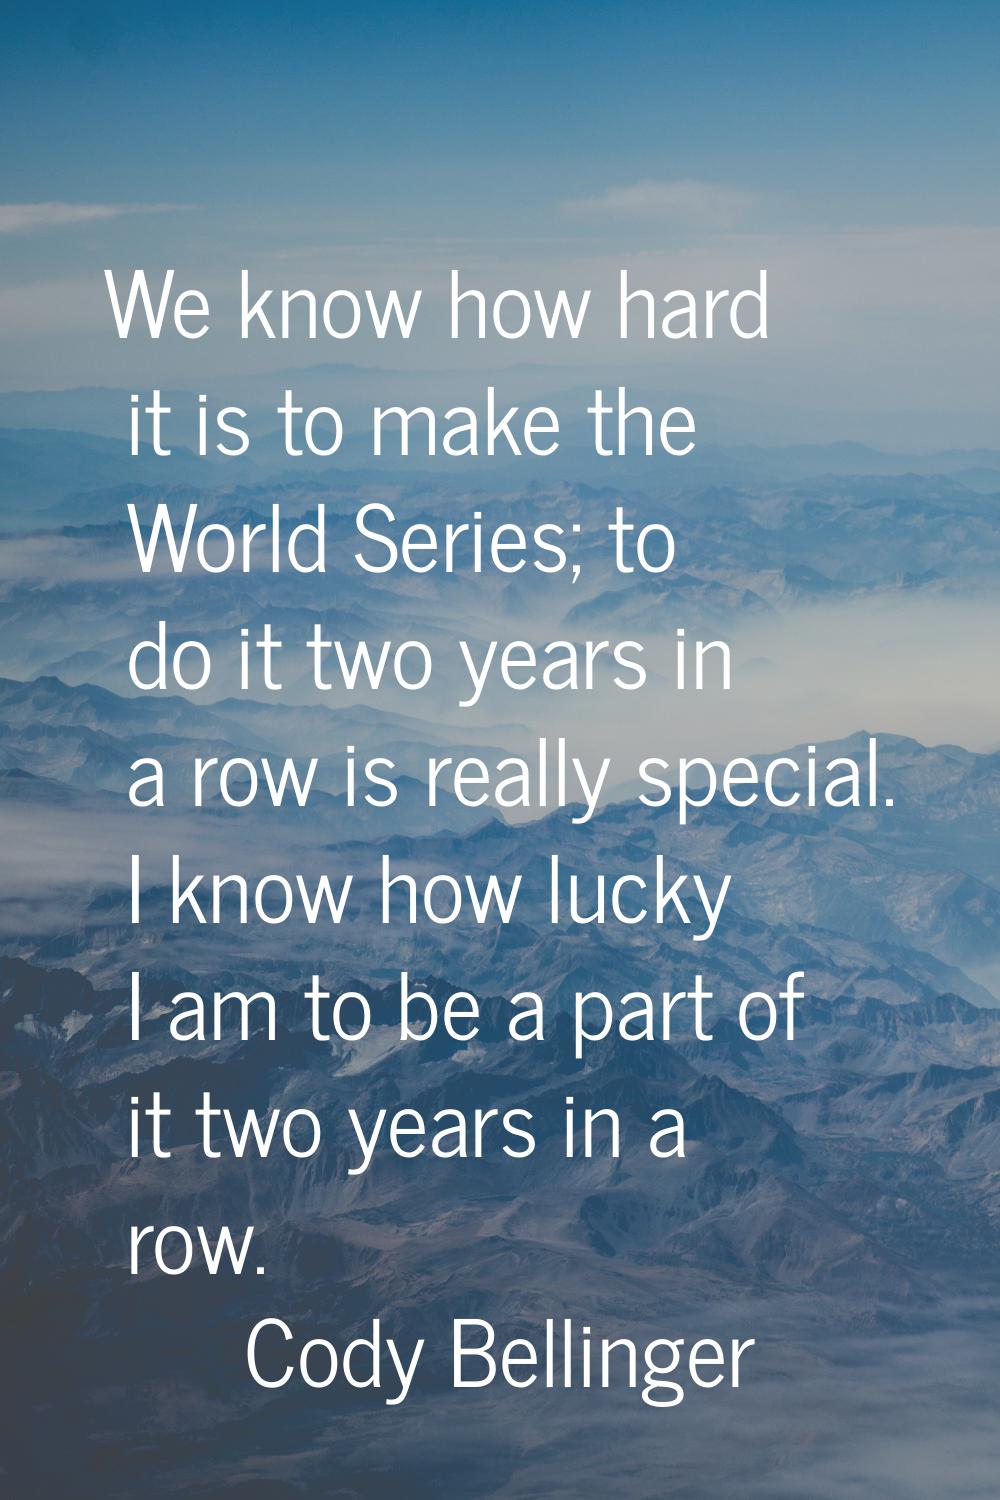 We know how hard it is to make the World Series; to do it two years in a row is really special. I k